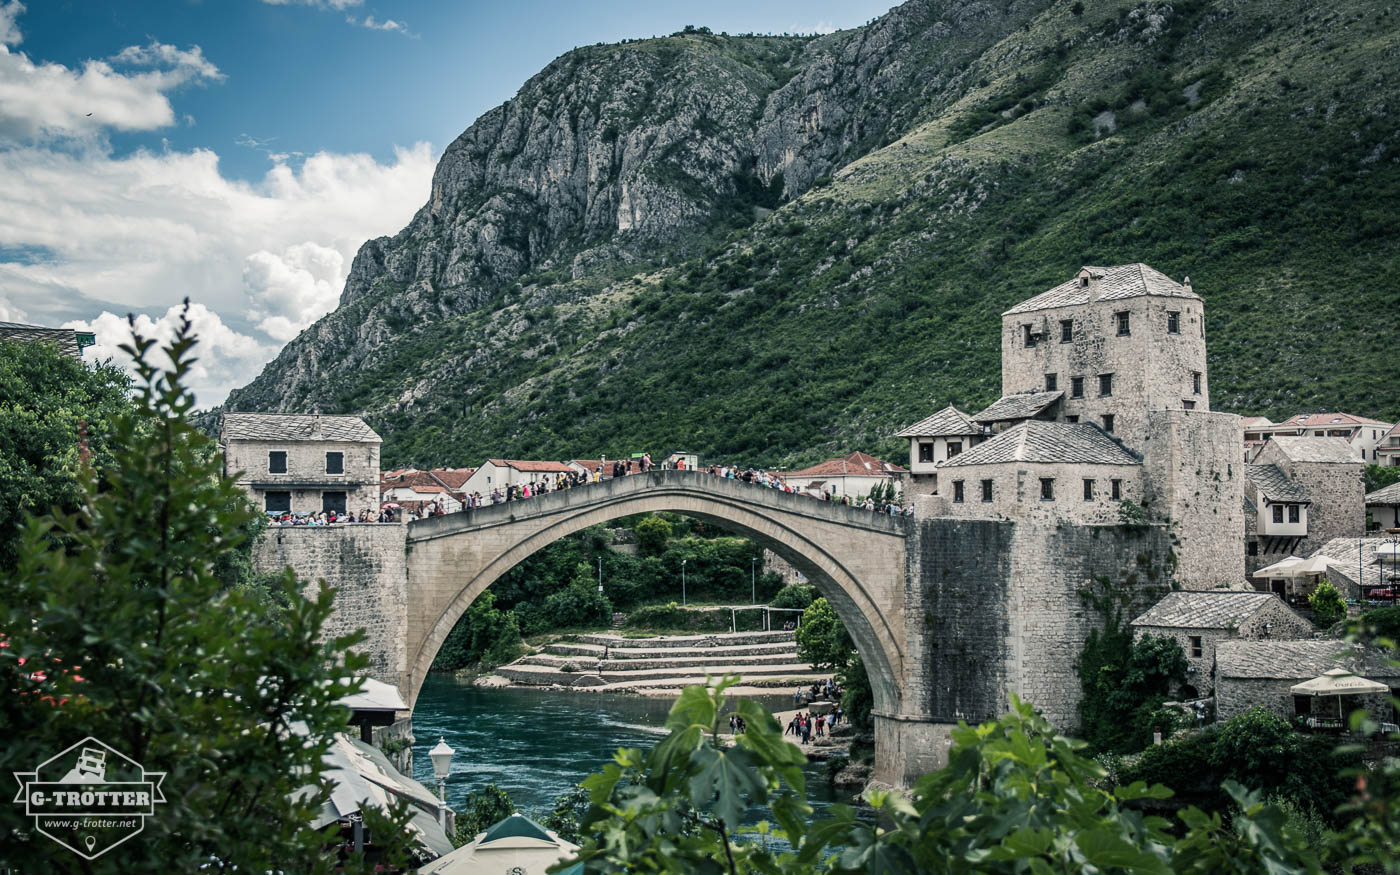 Picture 4 of the picture gallery “A small piece of Bosnia-Herzegovina”